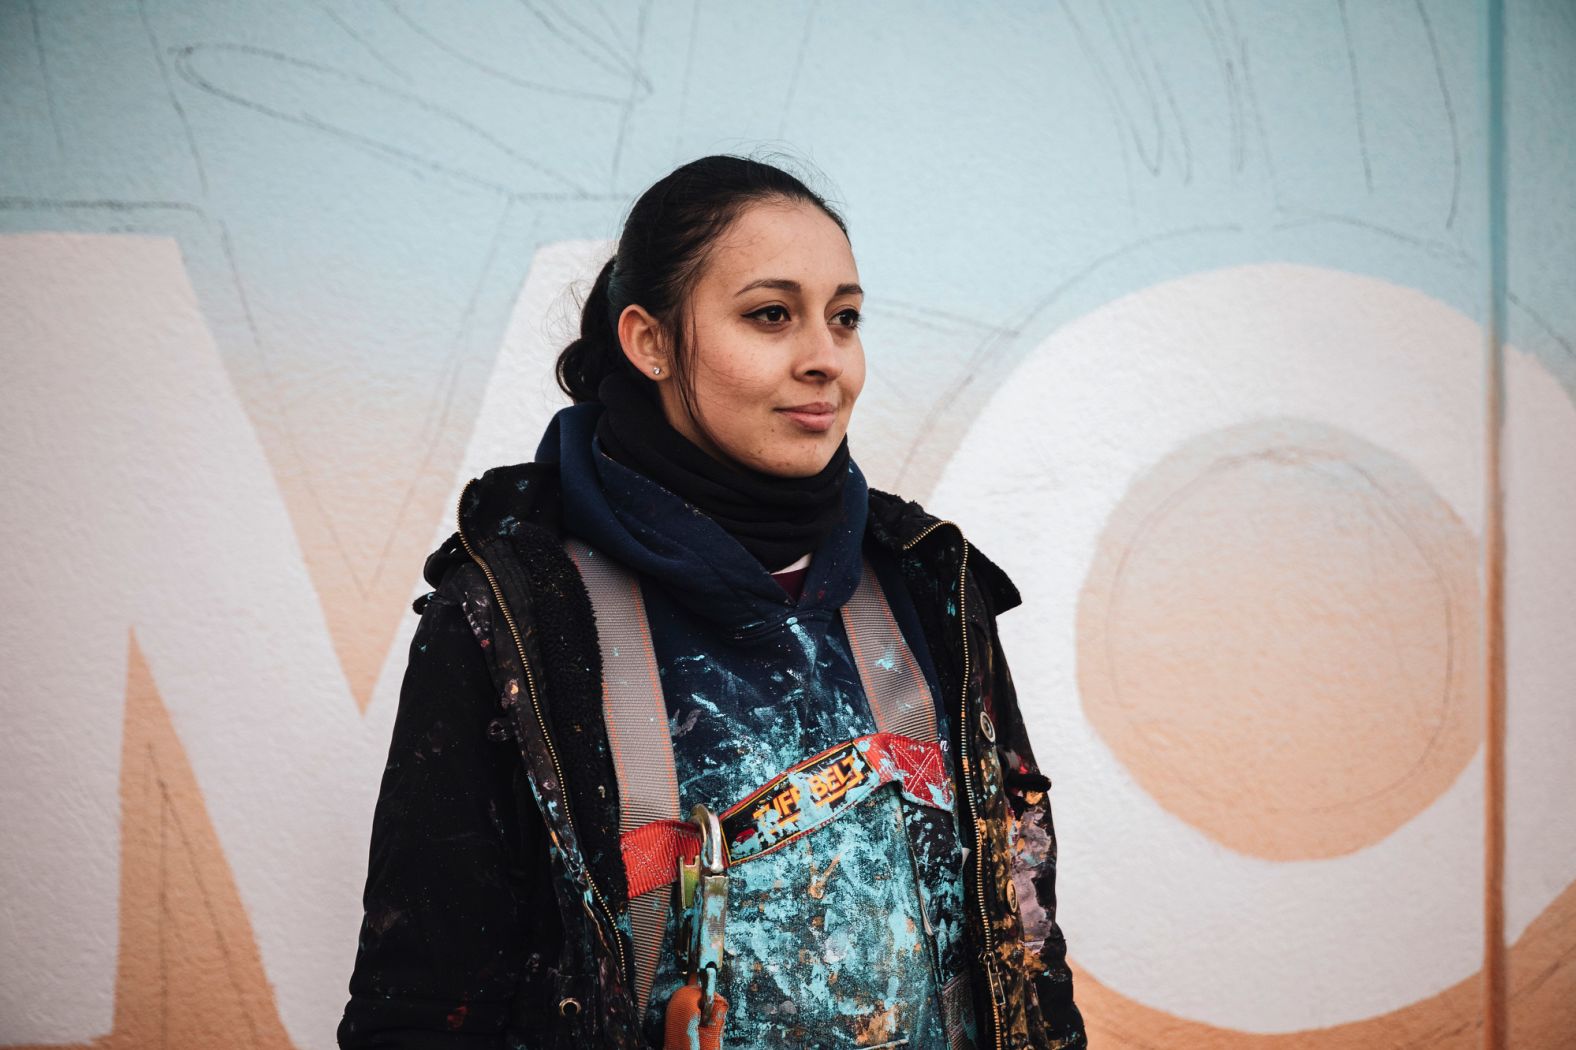 Yehimi A. Cambrón Álvarez painted a mural on the American Hotel in downtown Atlanta. "I'm Mexicana, undocumented, a woman, and young. Atlanta is more than just black and white, and we won't be able to achieve justice if the conversations continue to be so binary," said the DACA recipient and high school art teacher. "It's a very powerful thing to be able to thrive while being undocumented. I wanted to focus on that so other people who might not feel that way yet can see that there is a way to (succeed) even as a undocumented person."